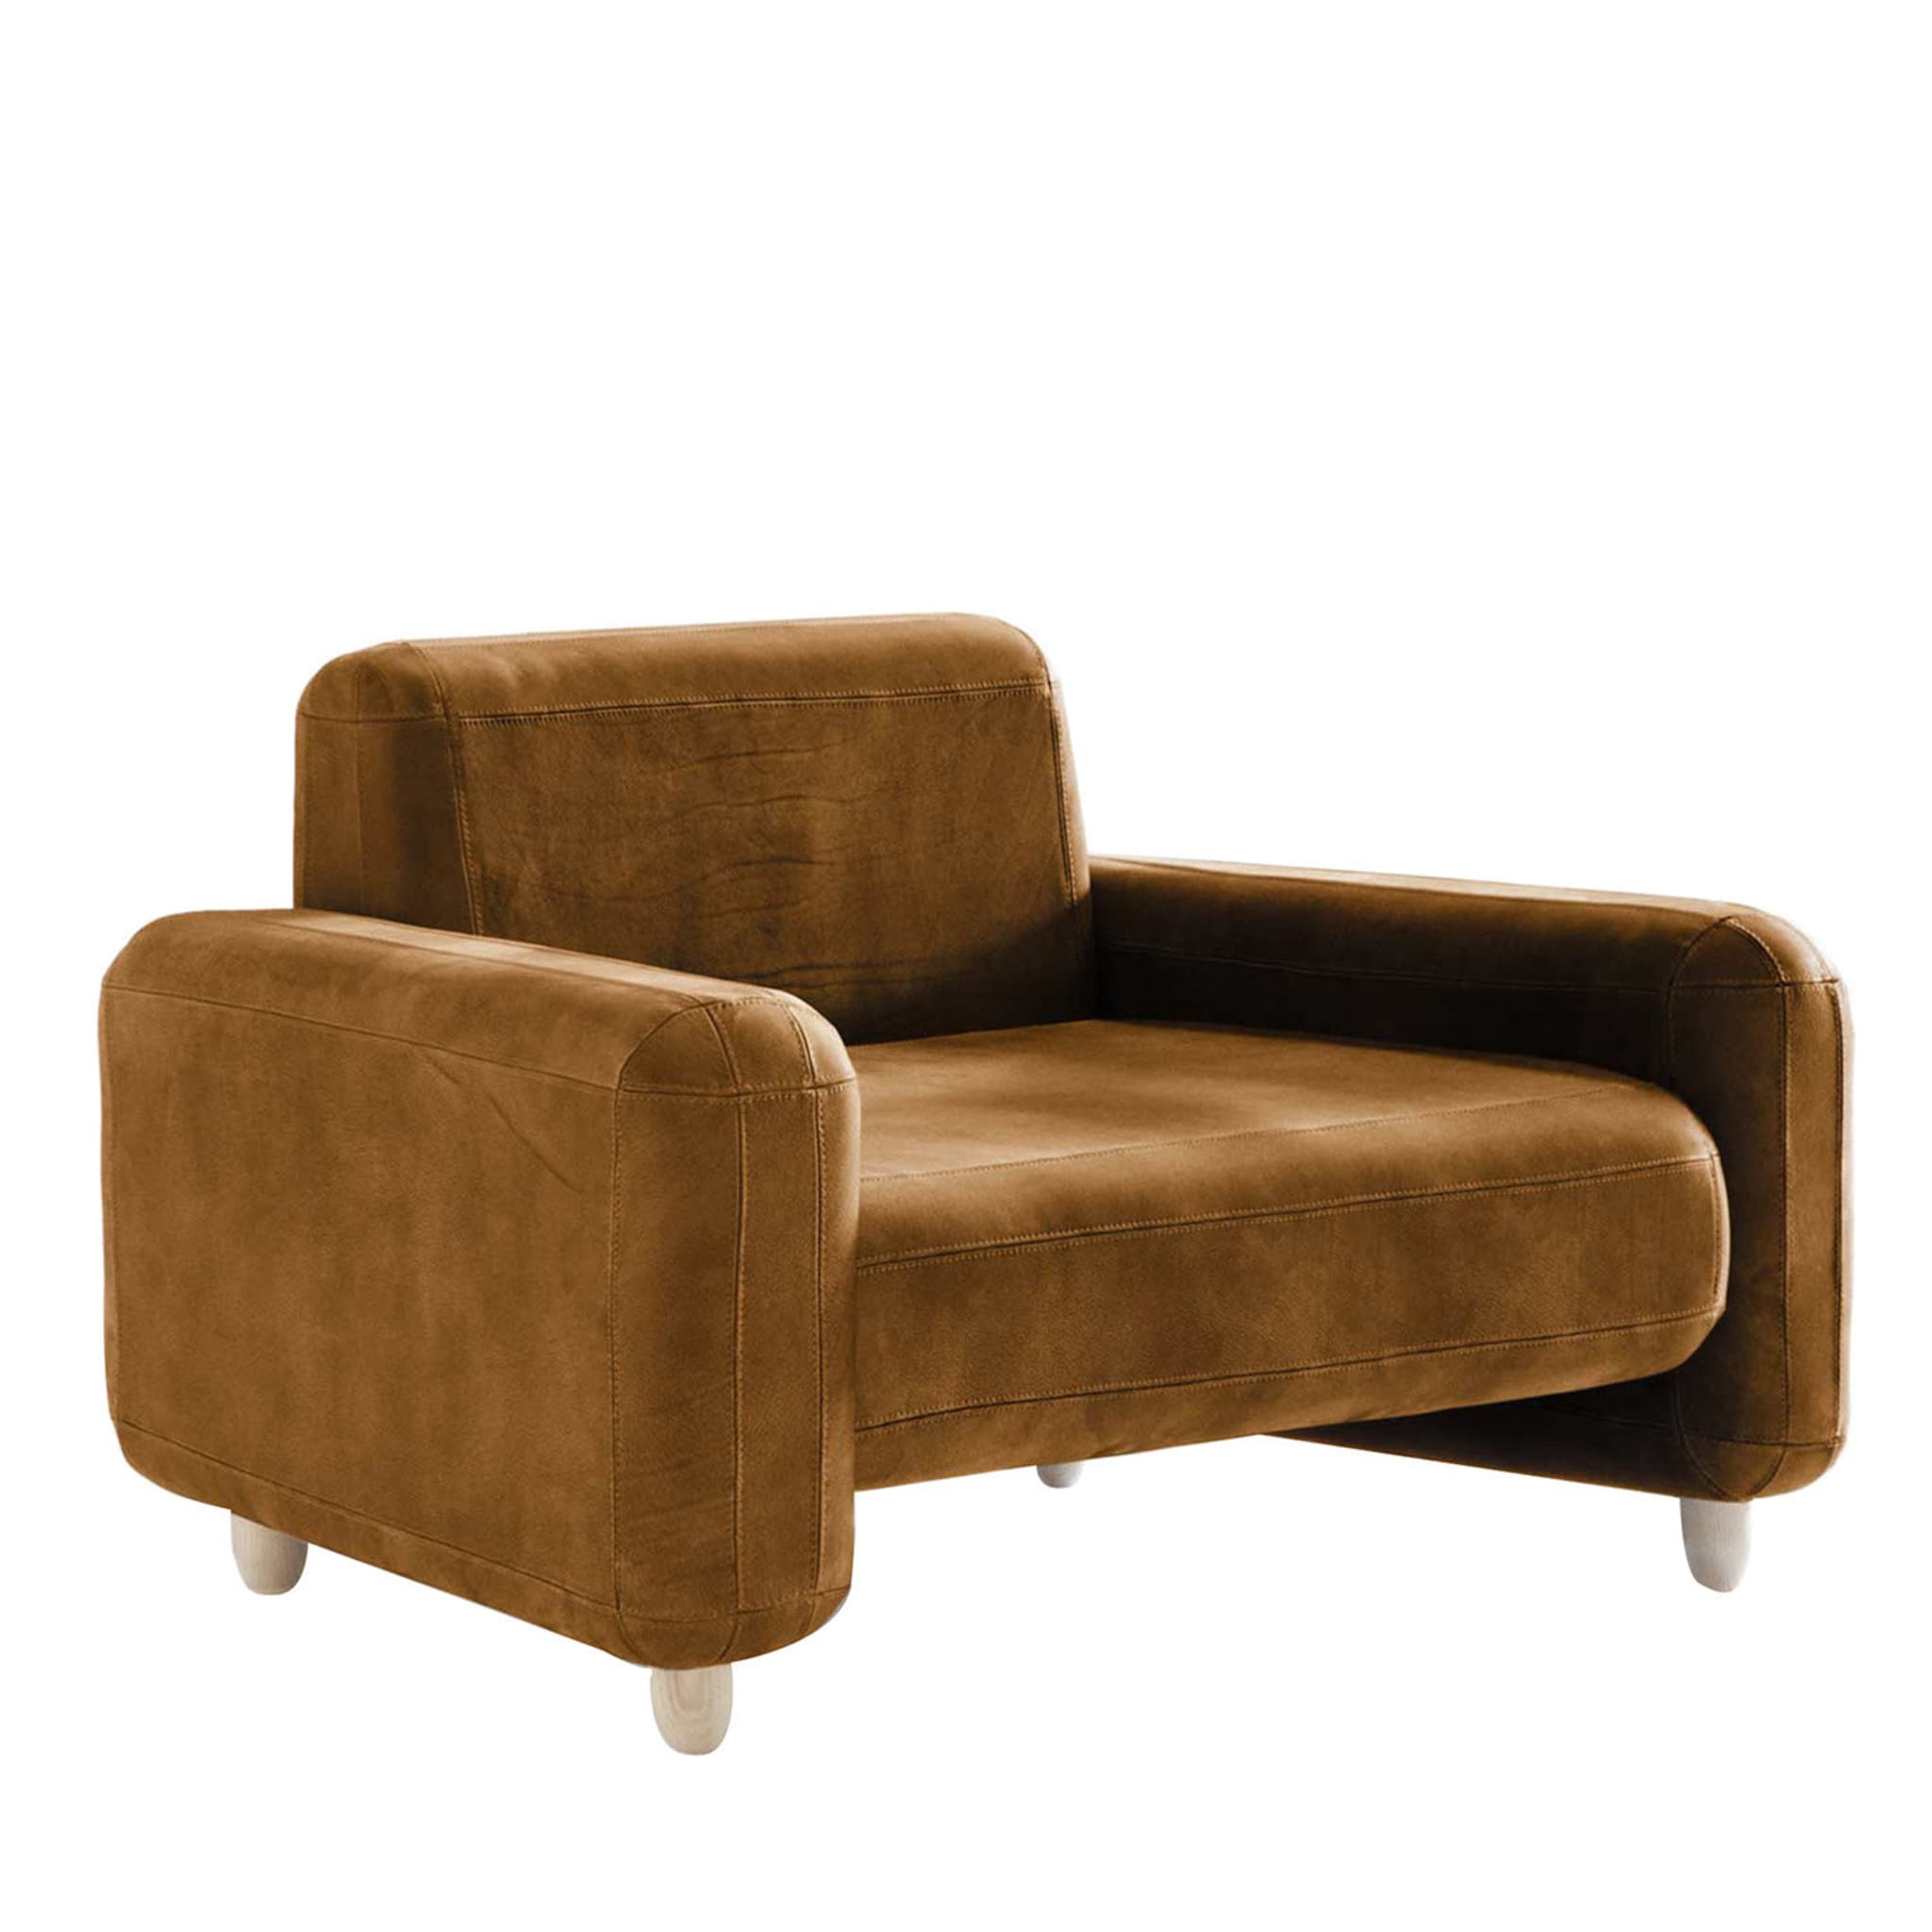 Traco Ecological Cognac Armchair by Paolo Cappello - Main view